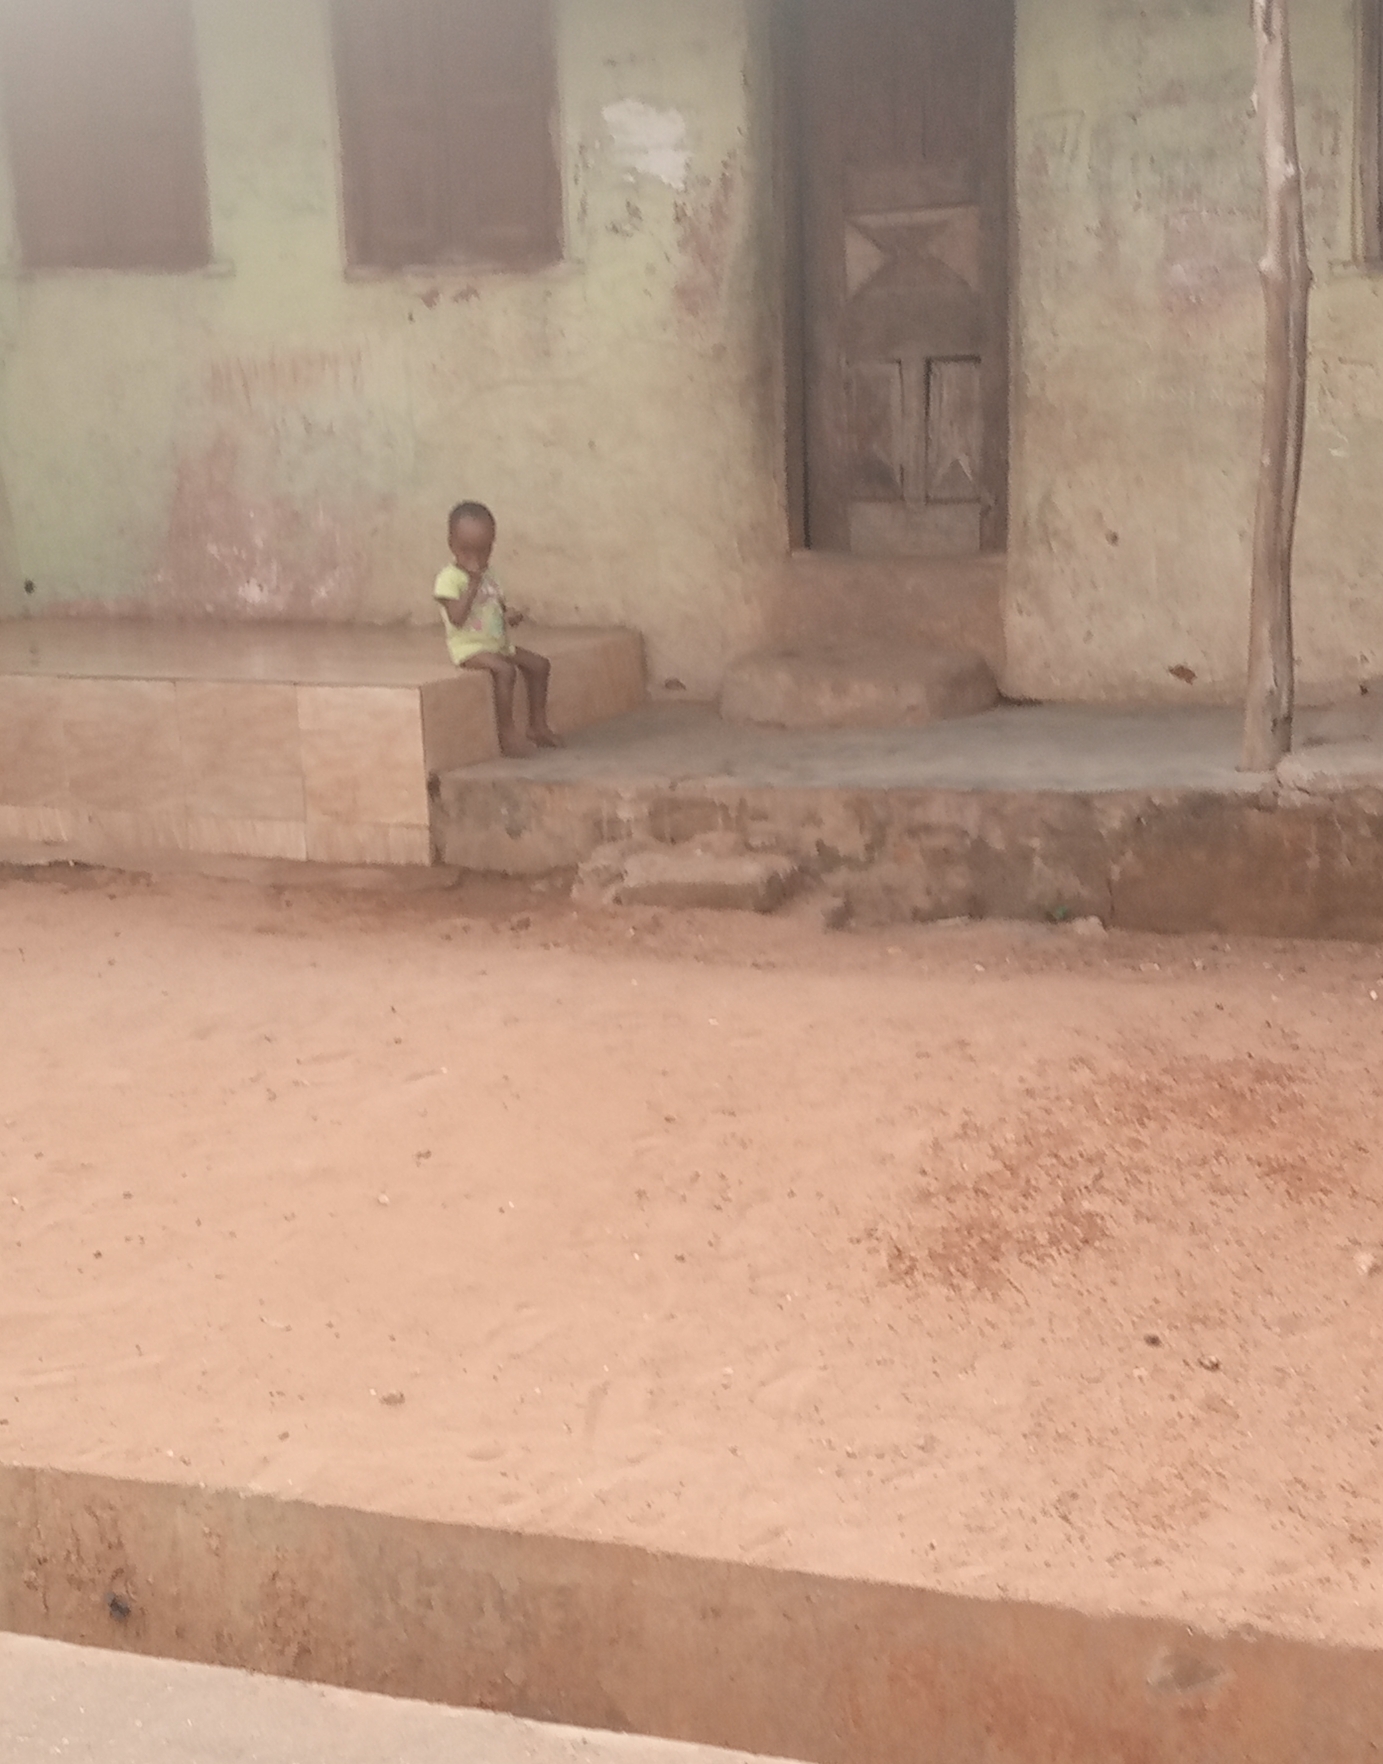 out of school children during school hours in Ifon town, Ondo State, Nigeria